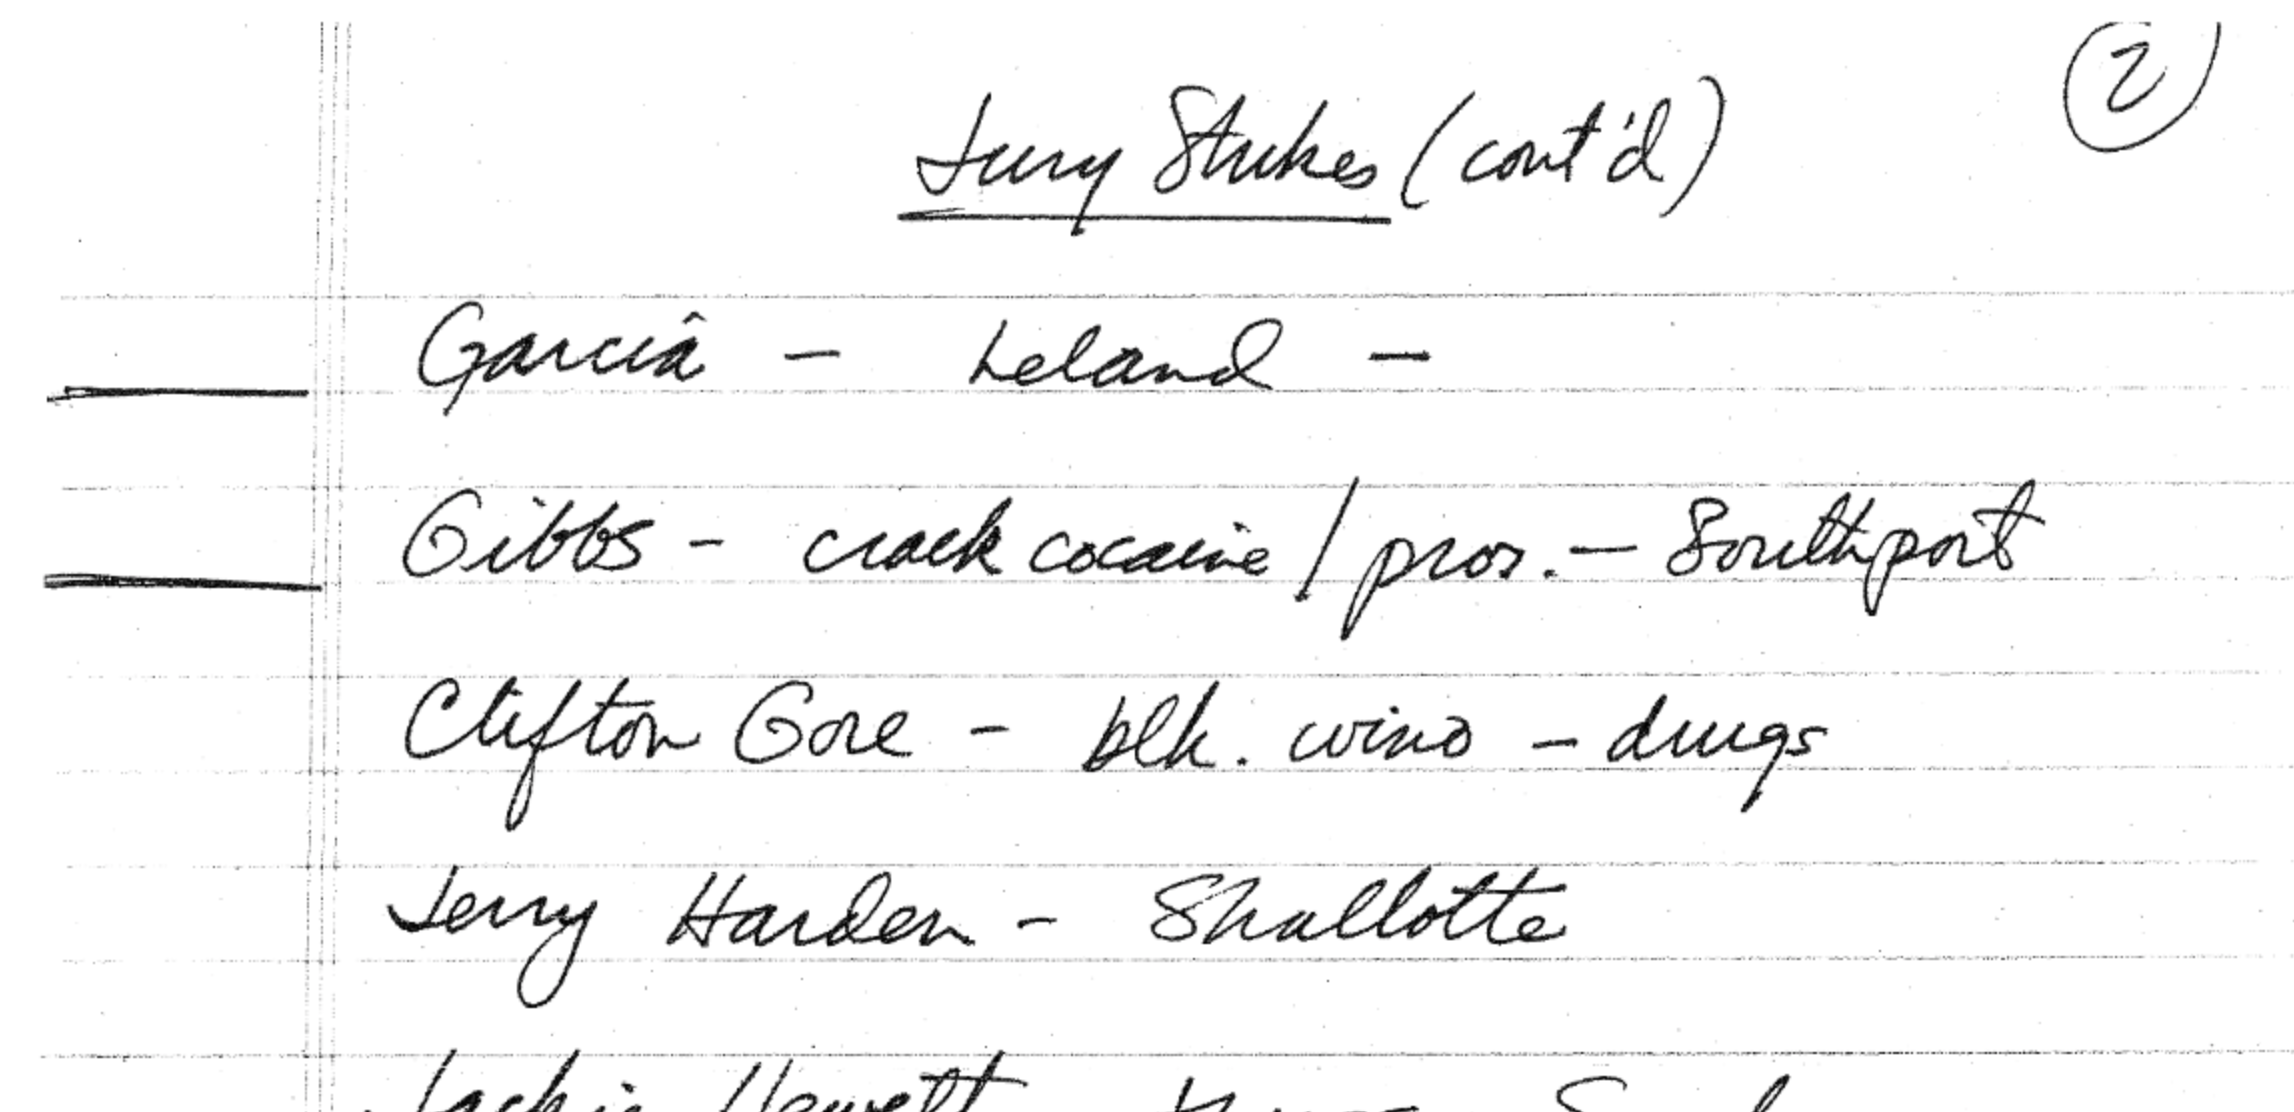 Handwritten jury selection notes in which a black candidate was described as a “blk wino.”